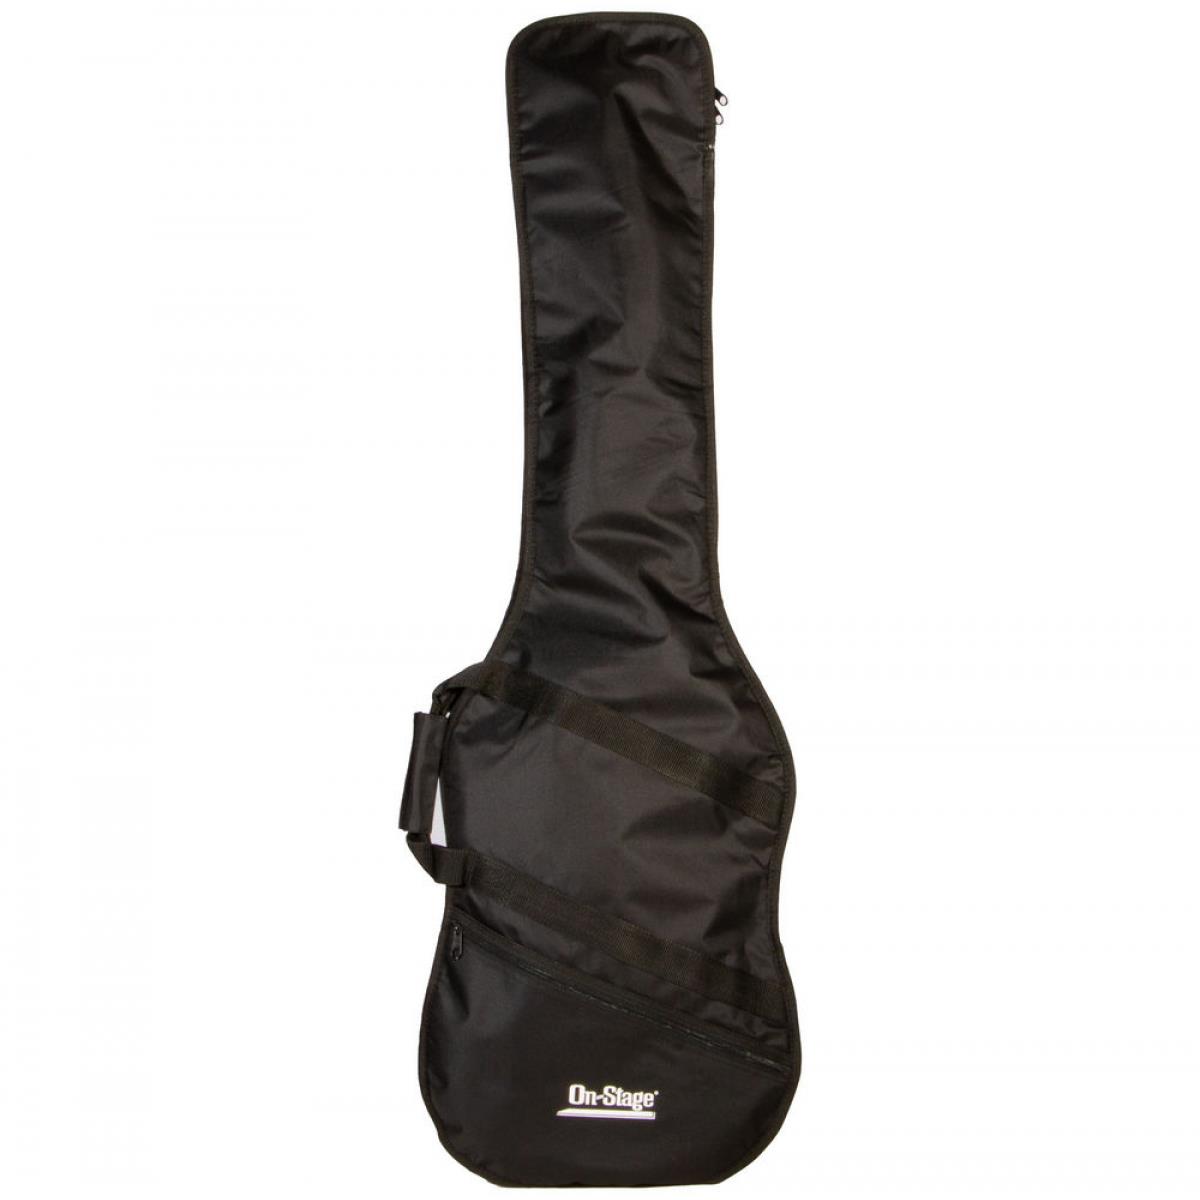 Image of On-Stage On-stage Bass Guitar Bag